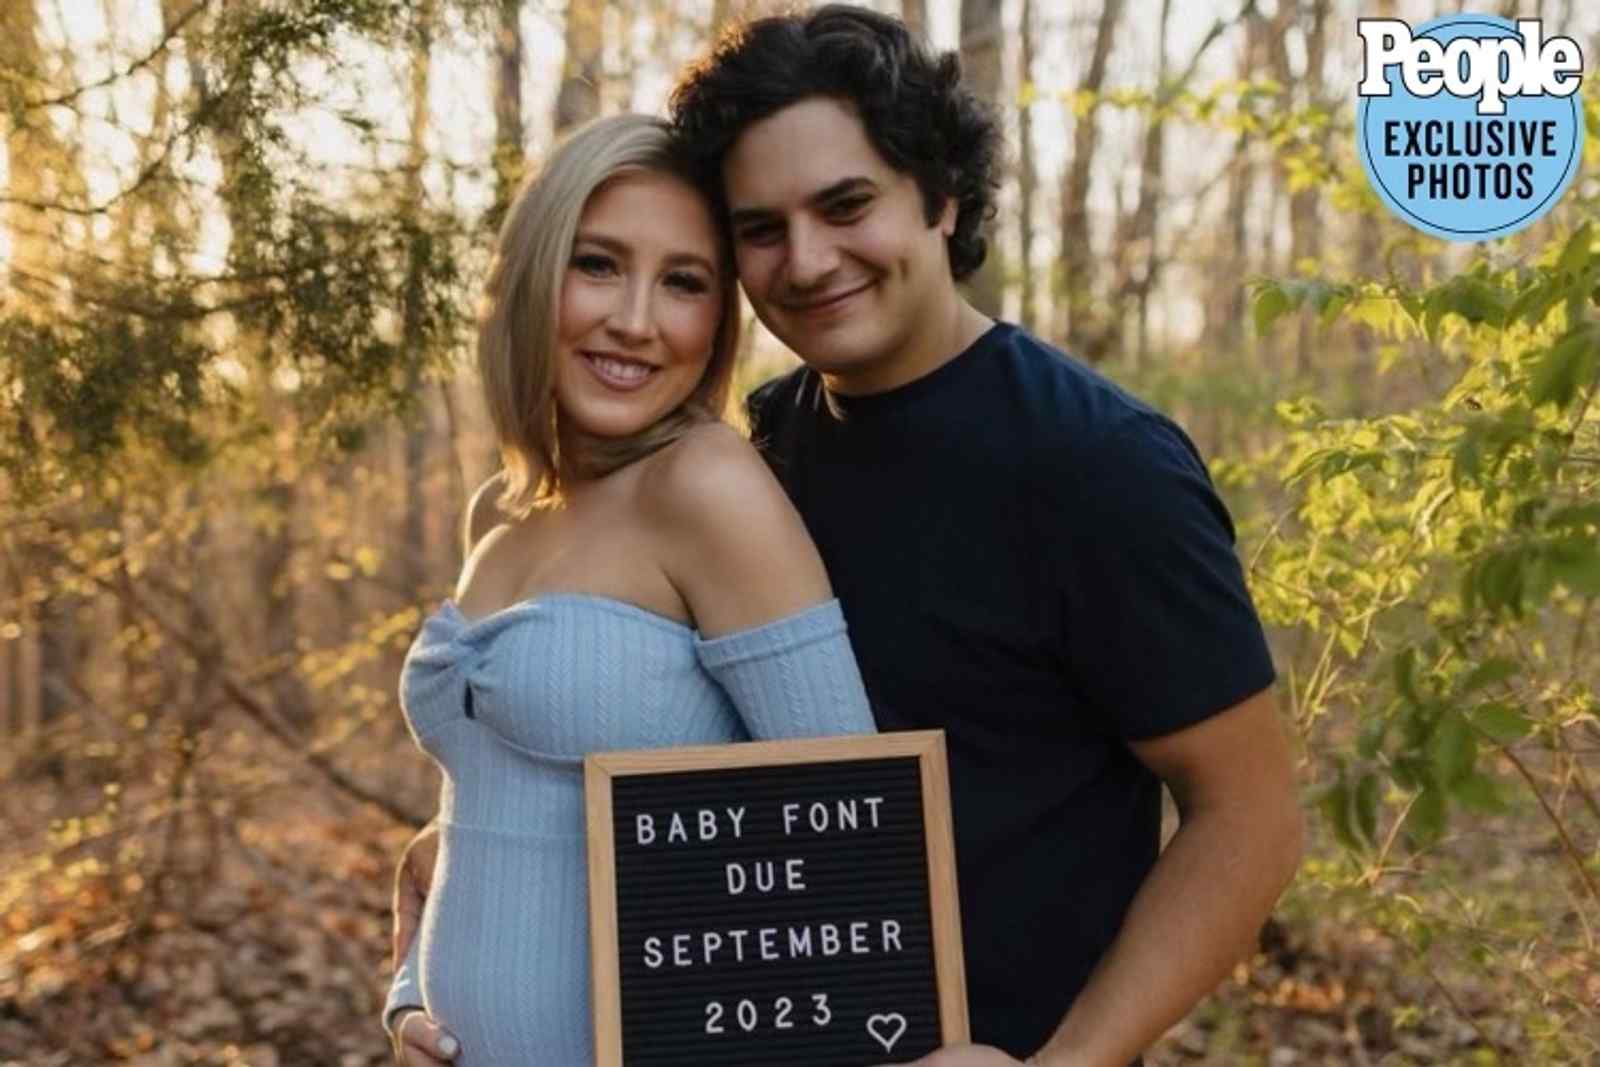 Baby Font is on the Way!